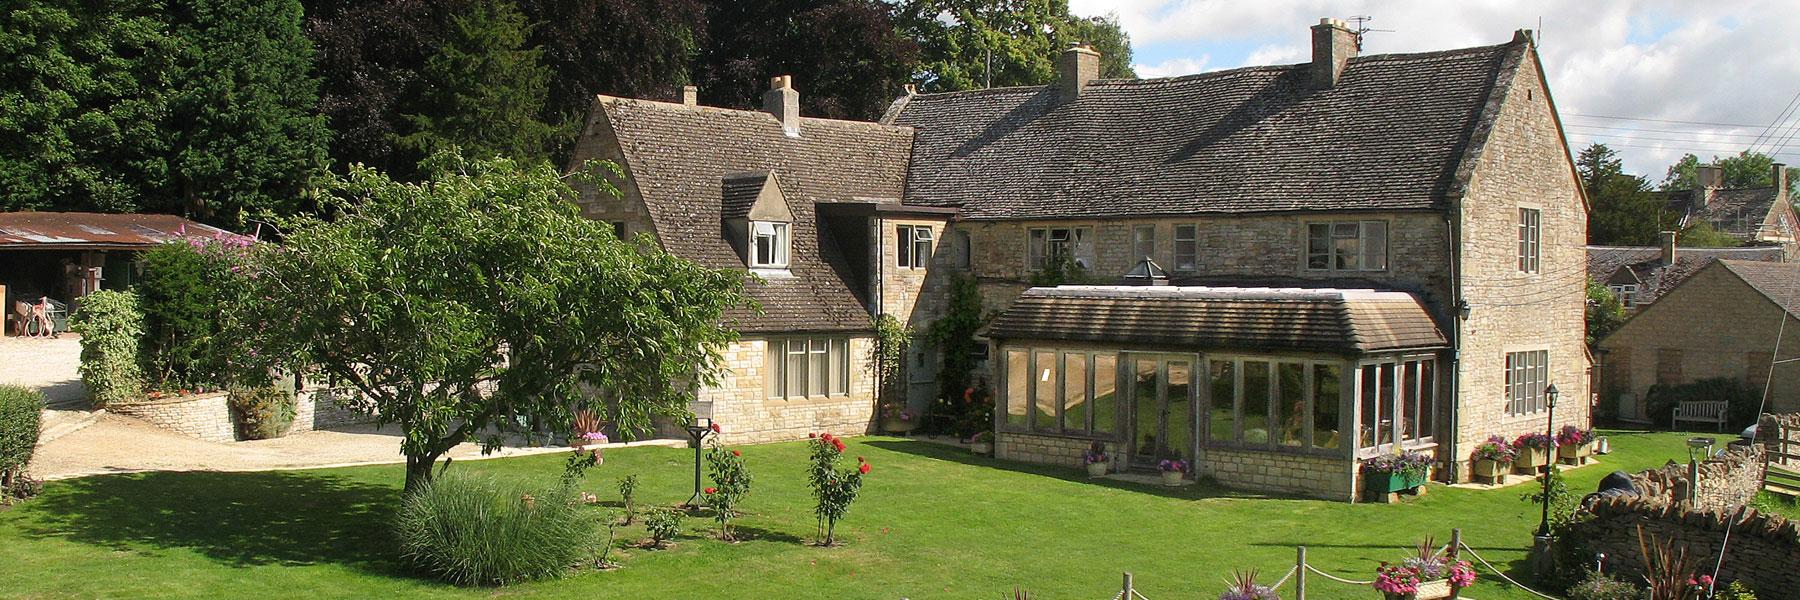 Park Farm Holiday Cottages, Gloucestershire Self